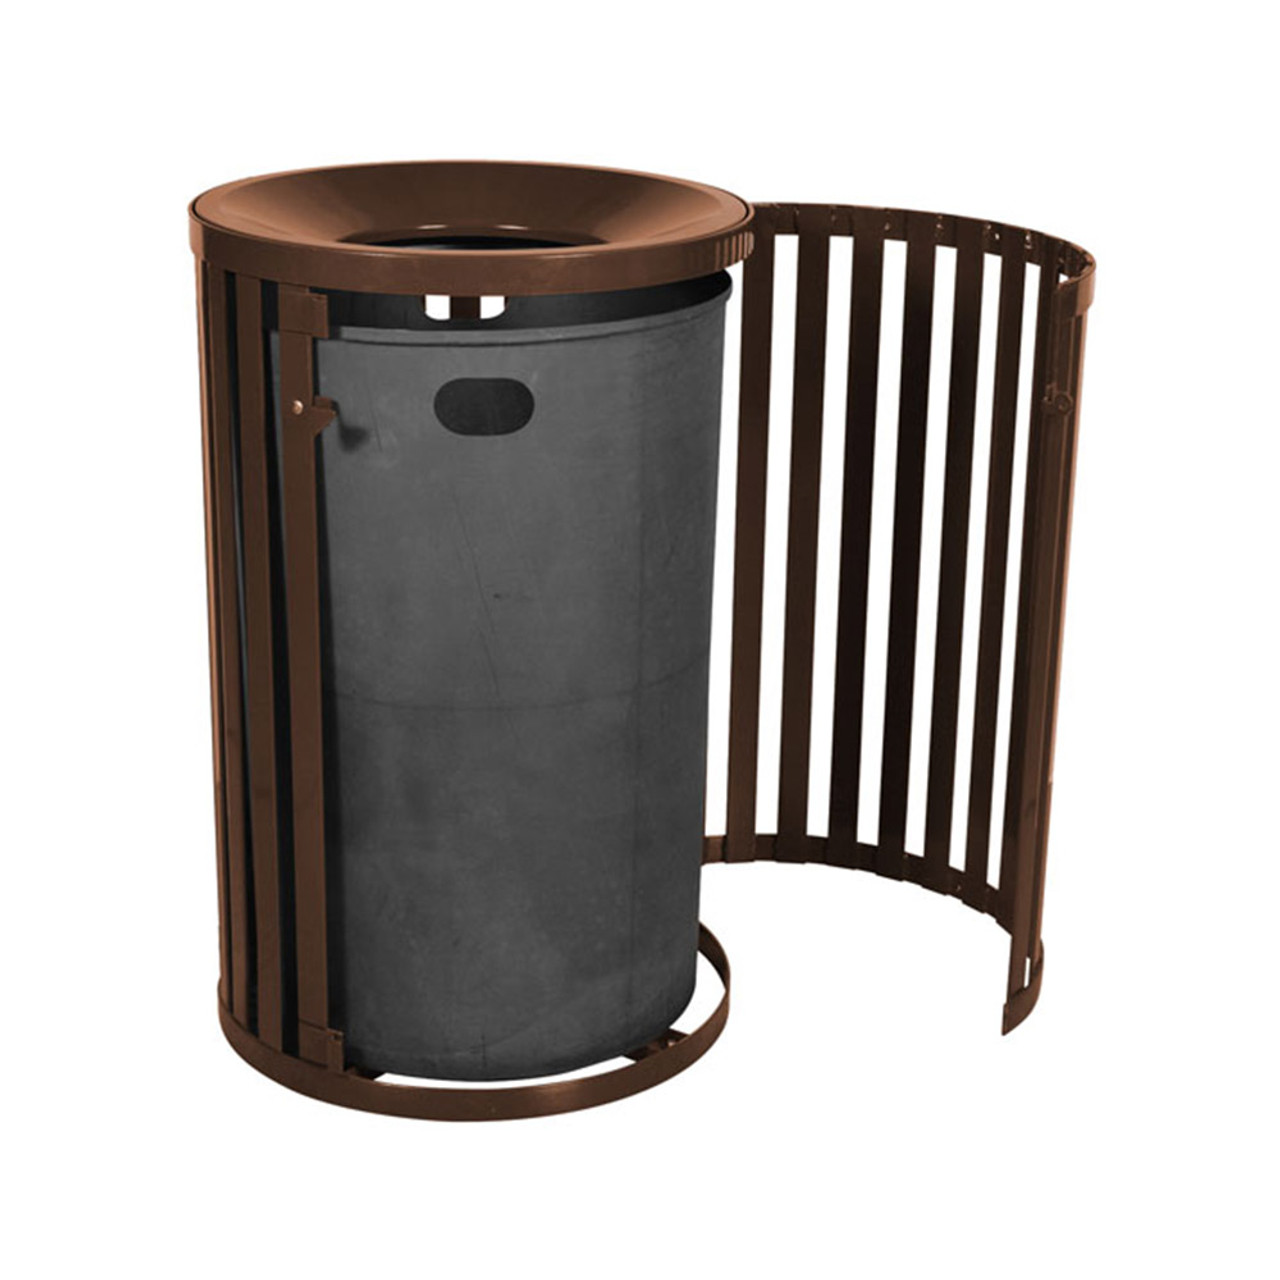 38 gal. Black Steel Slatted Commercial Outdoor Trash Can Receptacle with  Liner